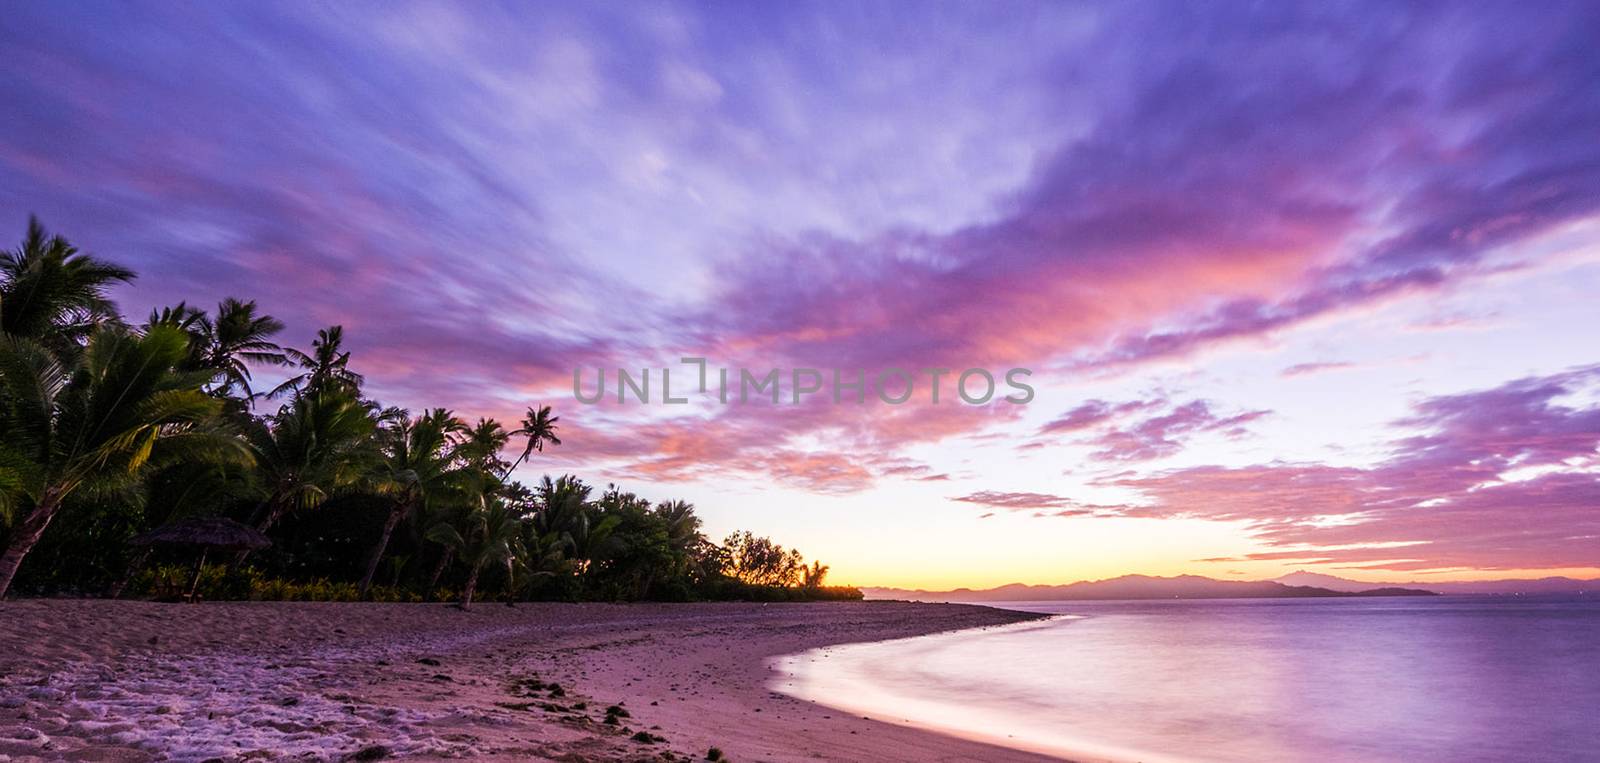 Beautiful pictures of Fiji